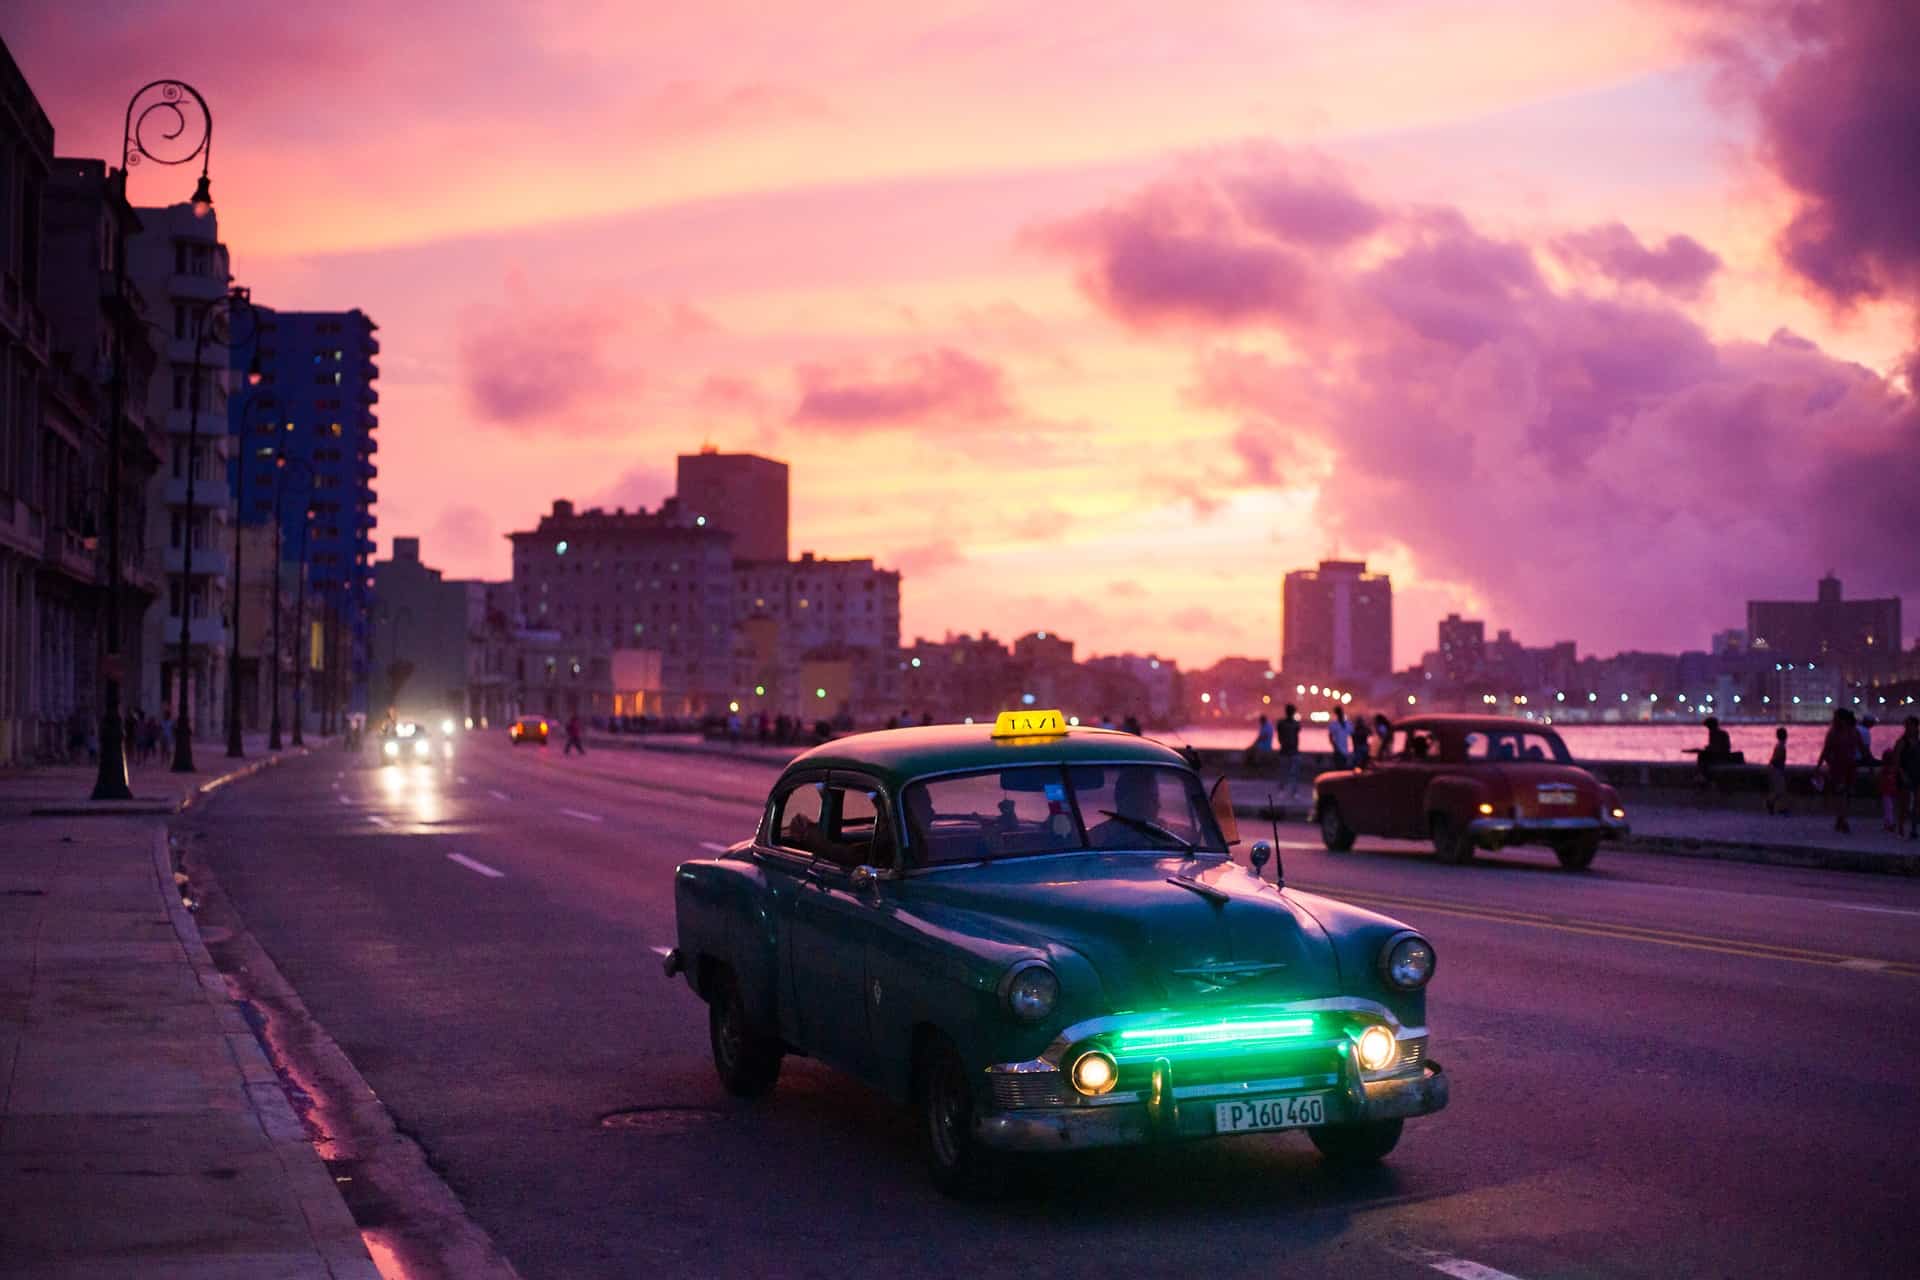 How to travel to Cuba as an American - an old fashioned car on the Malecon in Cuba